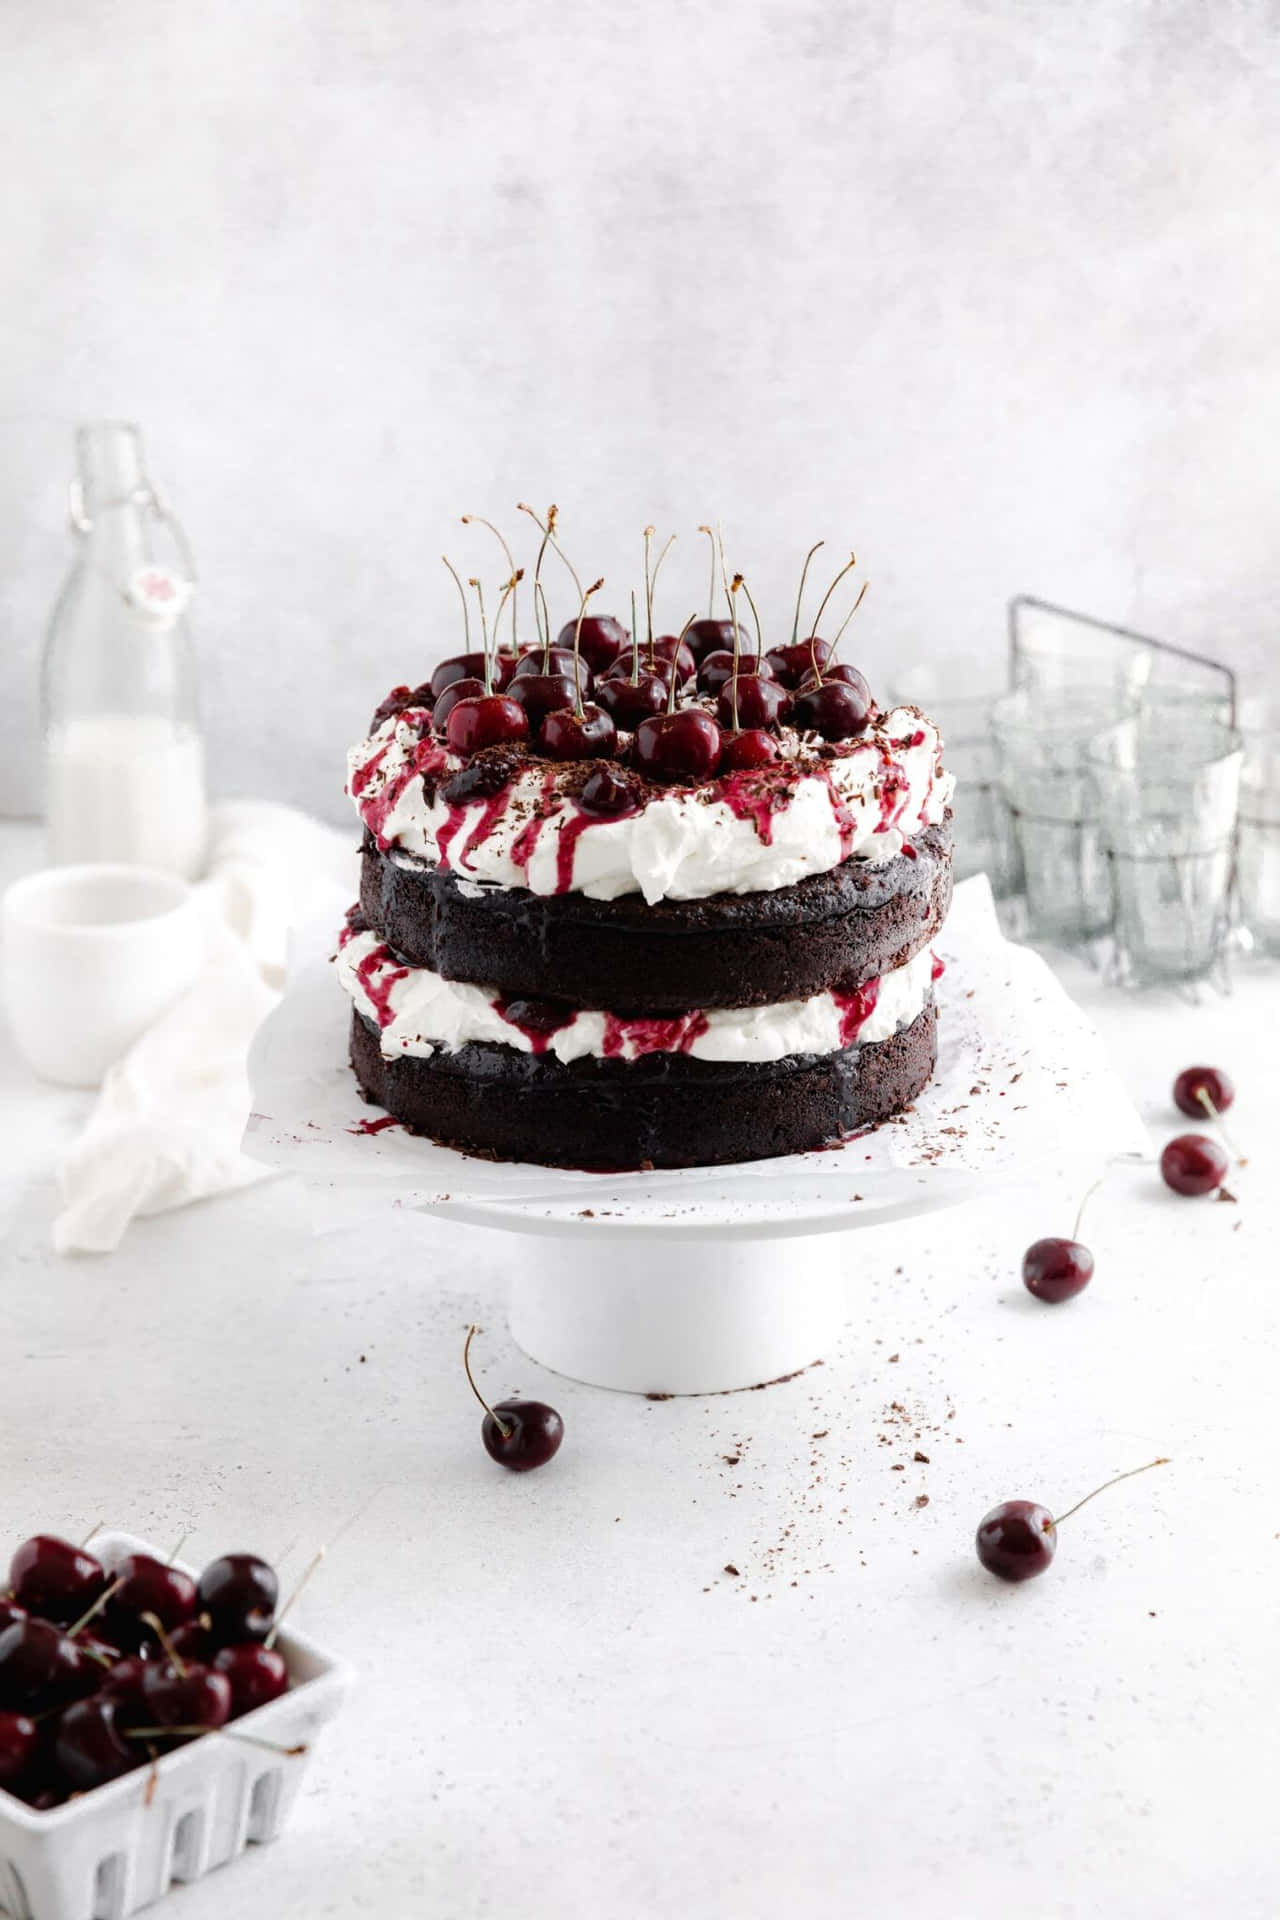 Indulgence is Key: Satisfy your sweet tooth today with a delightful Black Forest Cake. Wallpaper